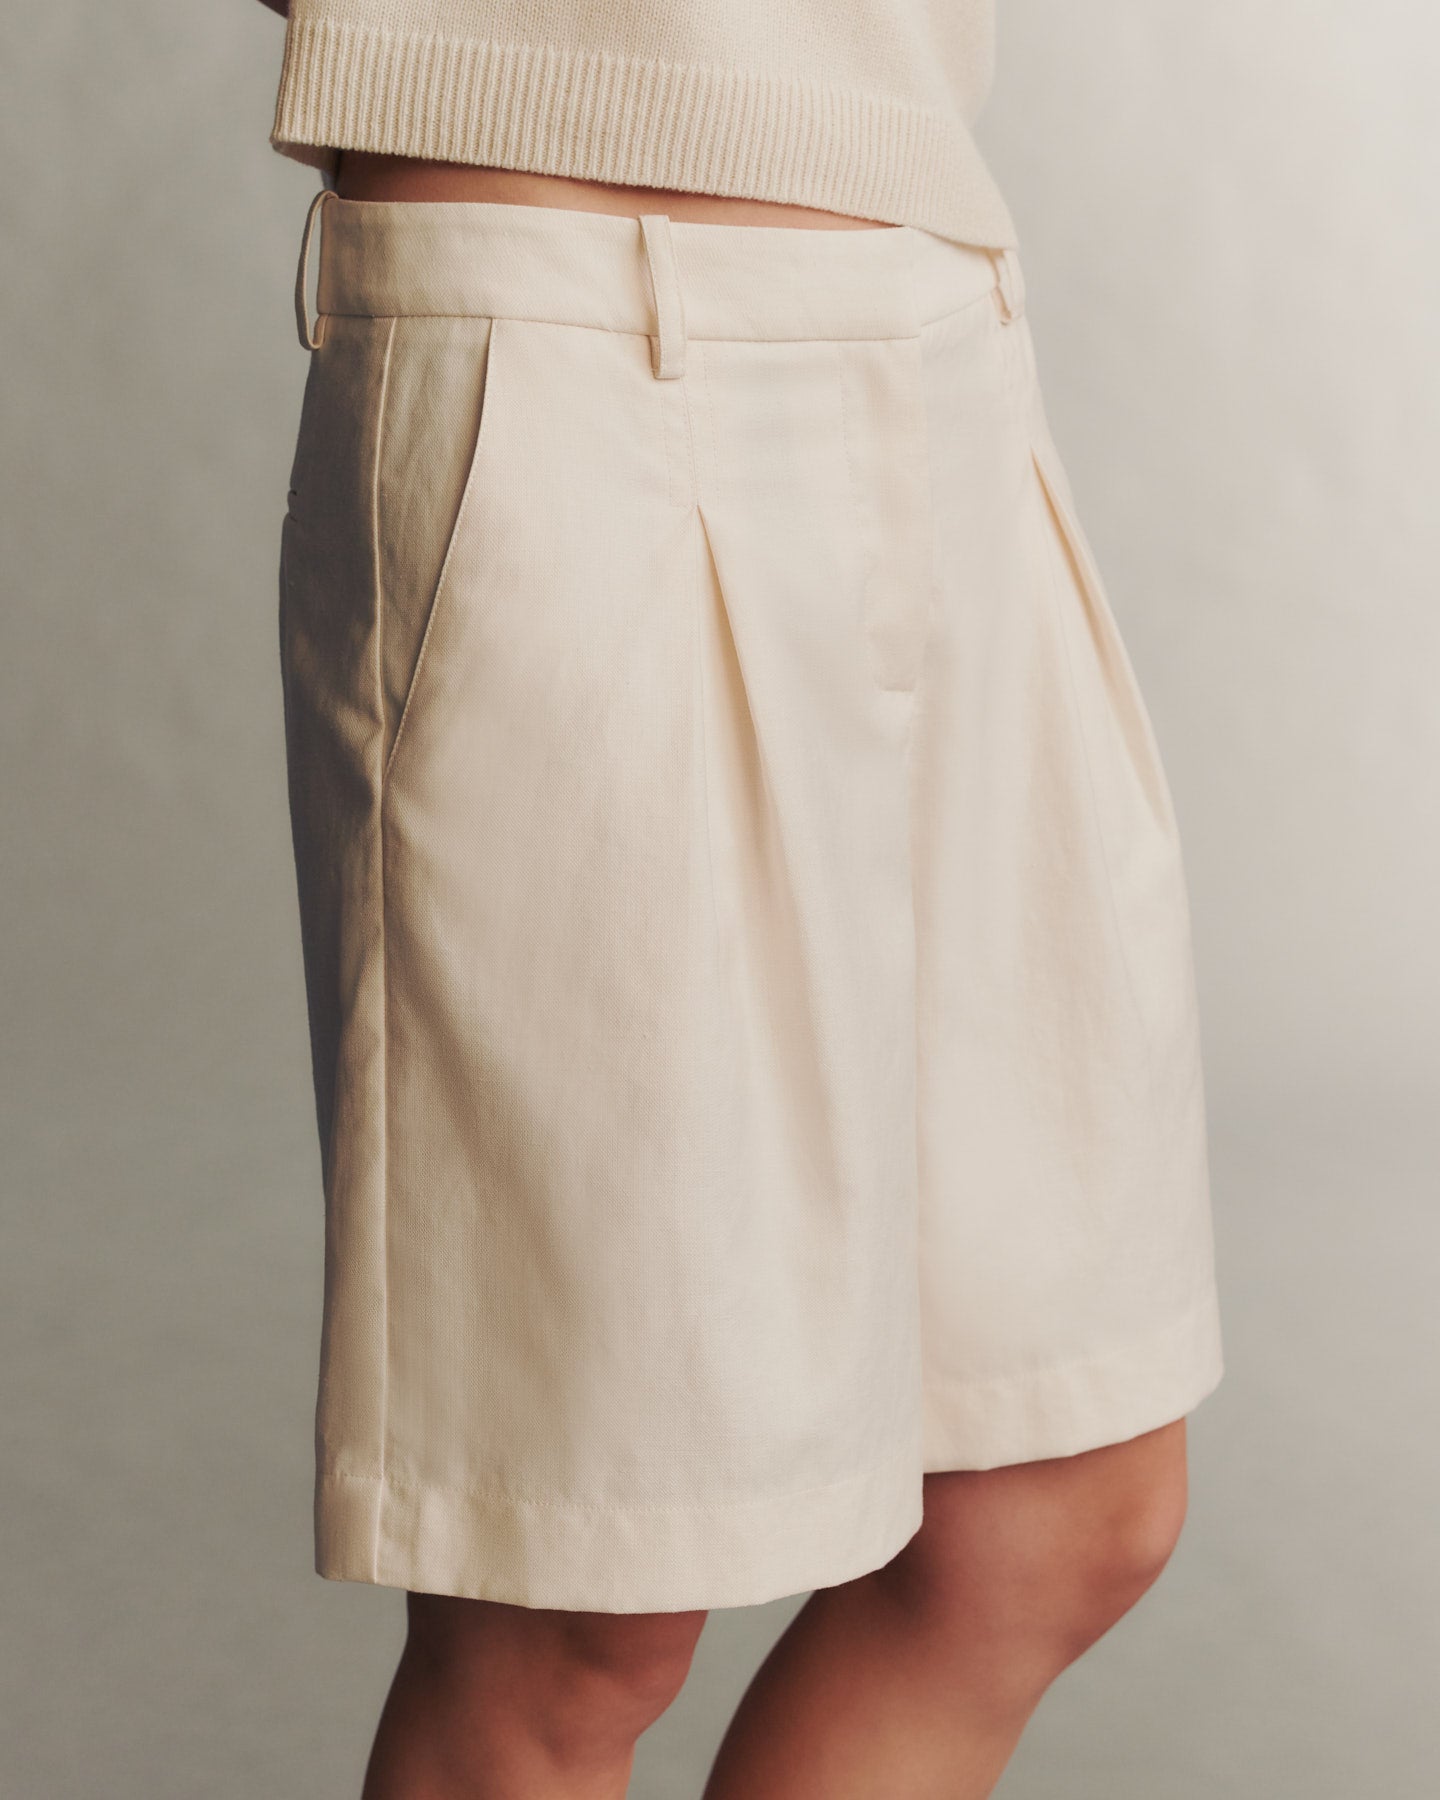 TWP Bone St. George Short in Cotton Linen view 4